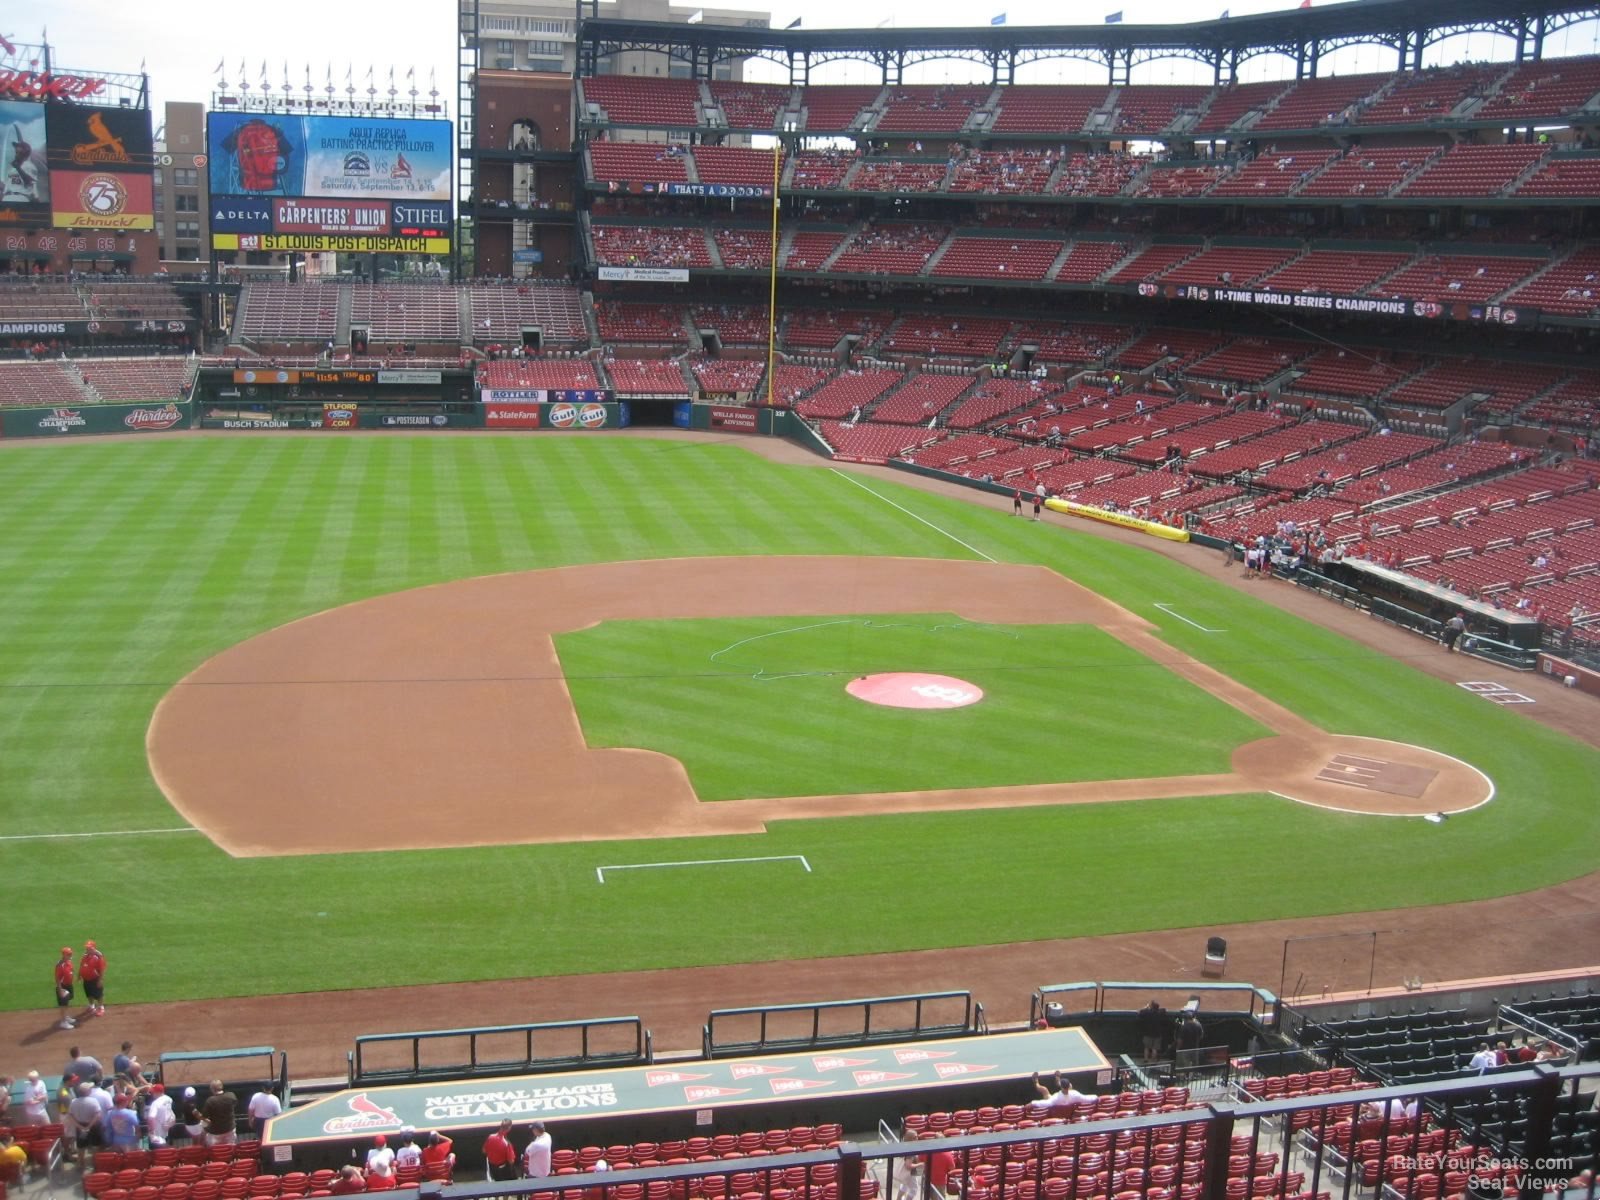 Section 257 at Busch Stadium - RateYourSeats.com